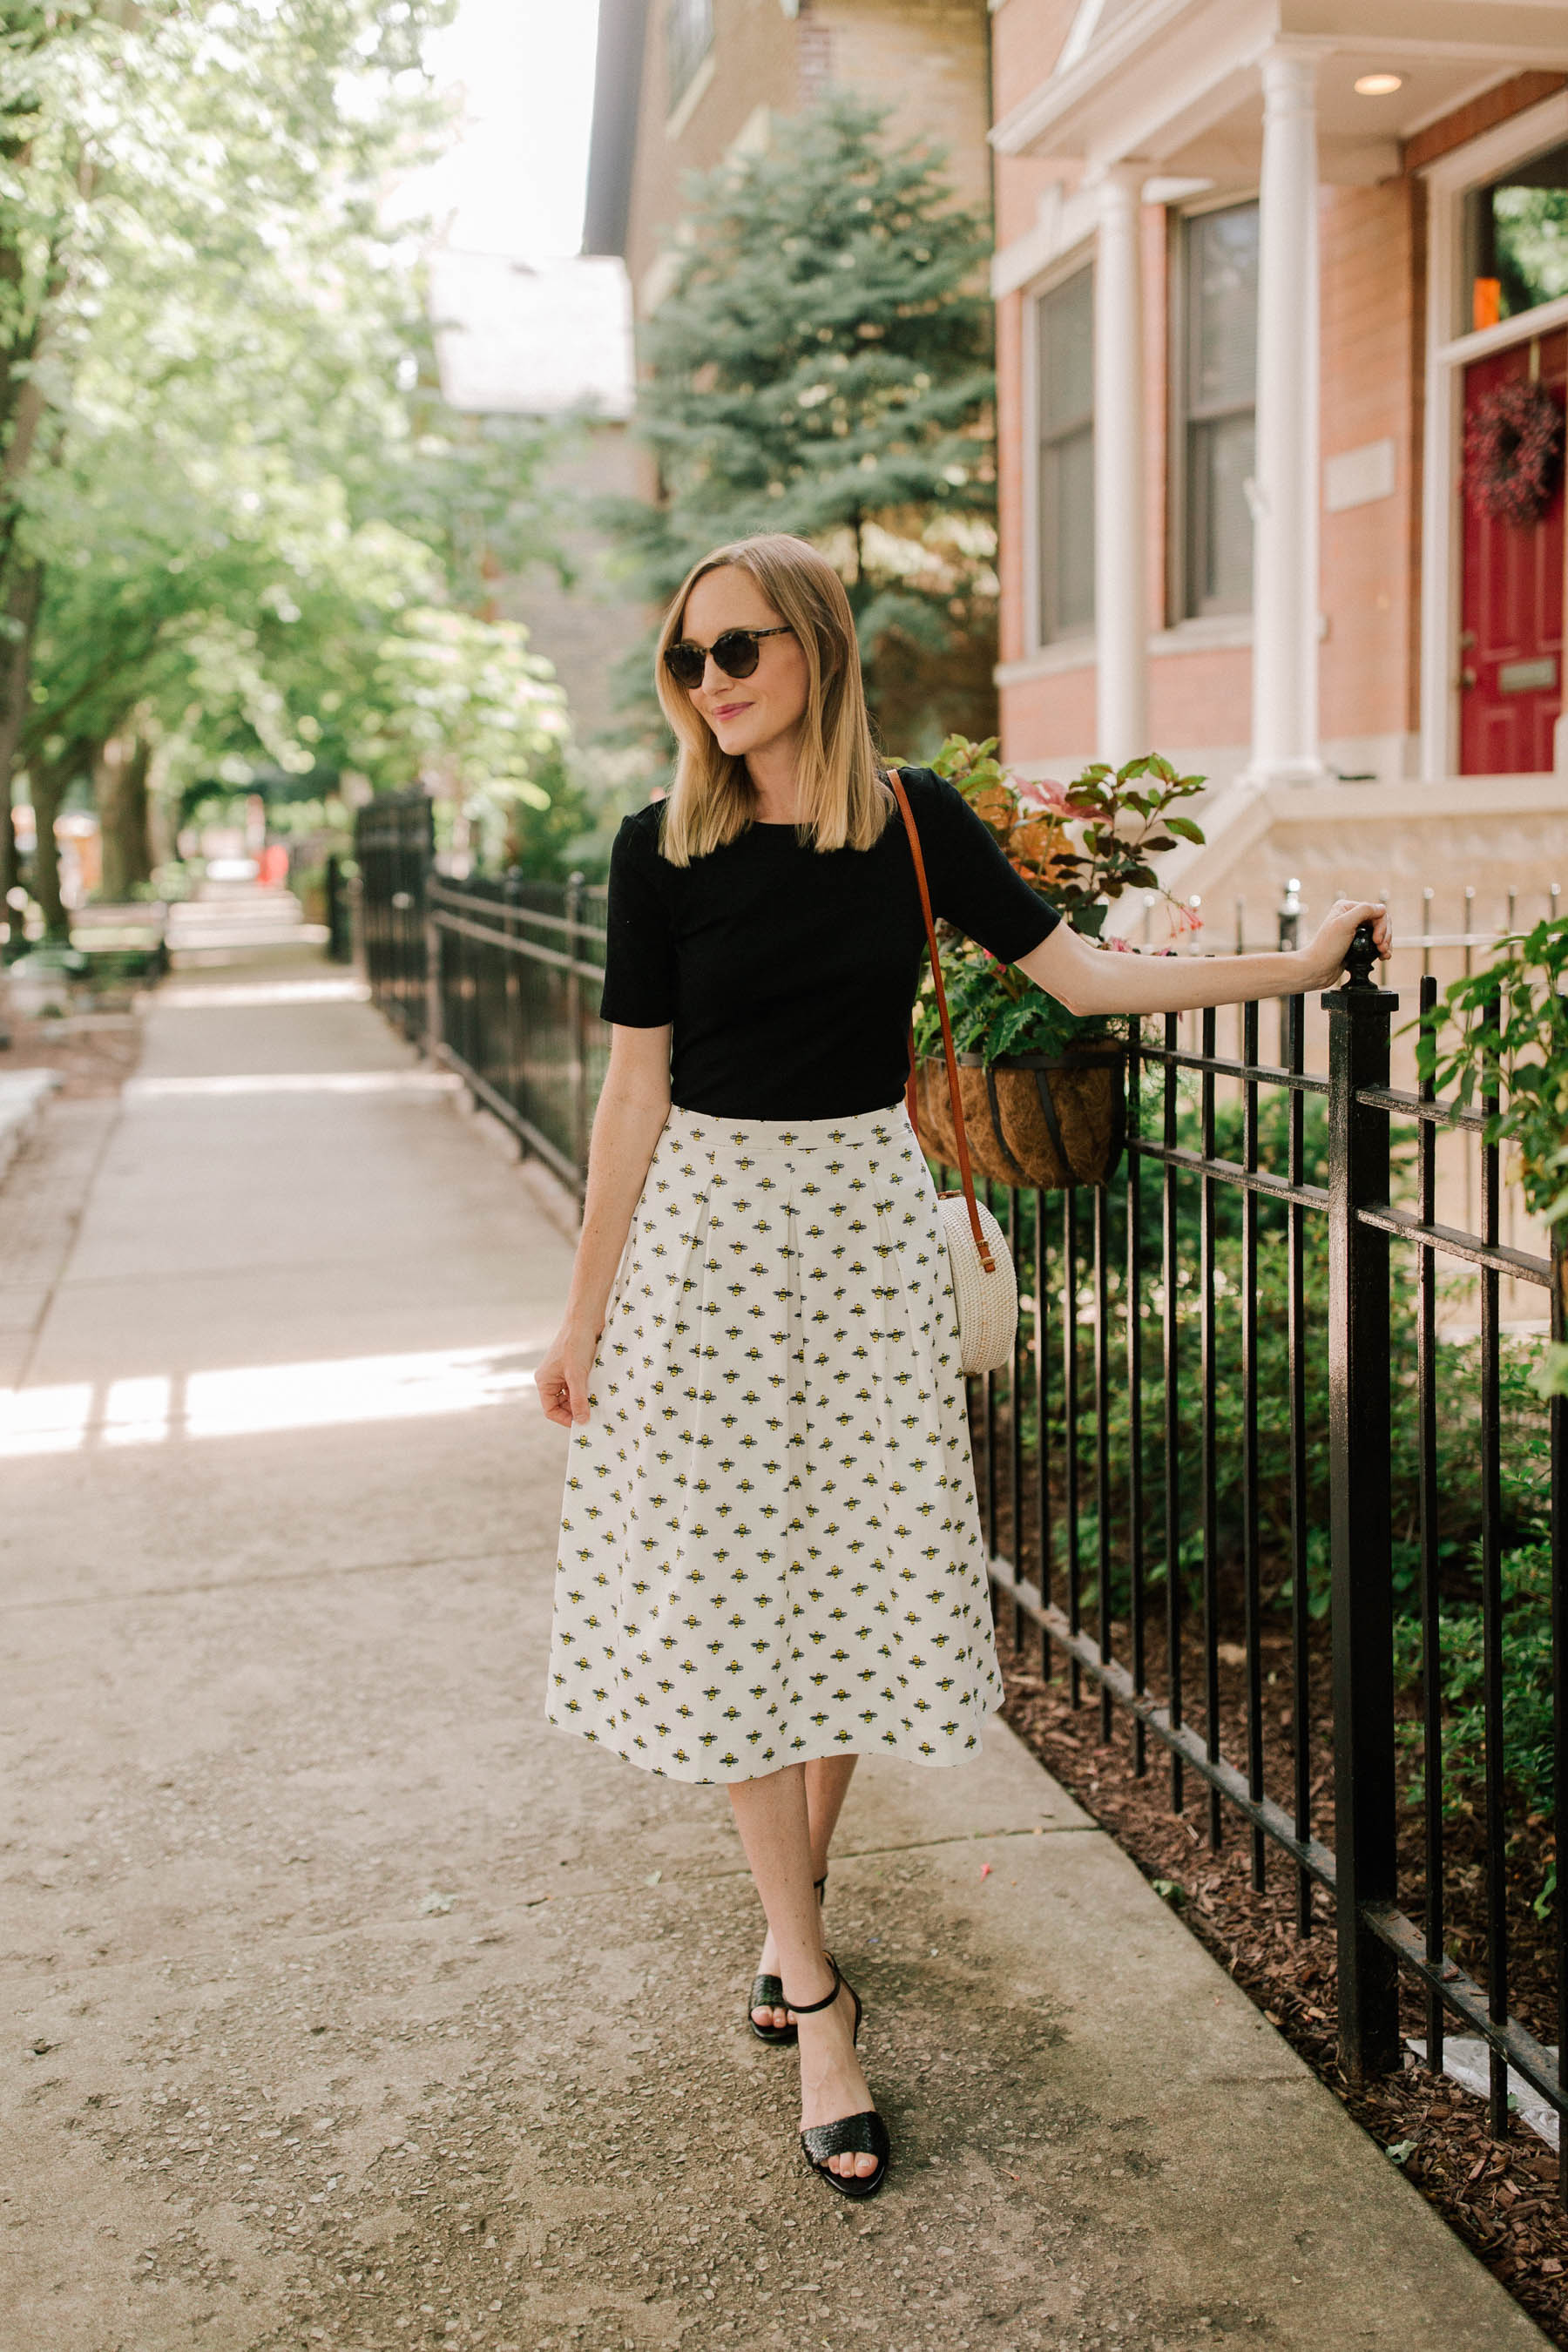 Bee Skirt (Also available at Boden.) / Perfect Tee / Current Favorite Black Sale Sandals  / woven bag - Kelly in the City